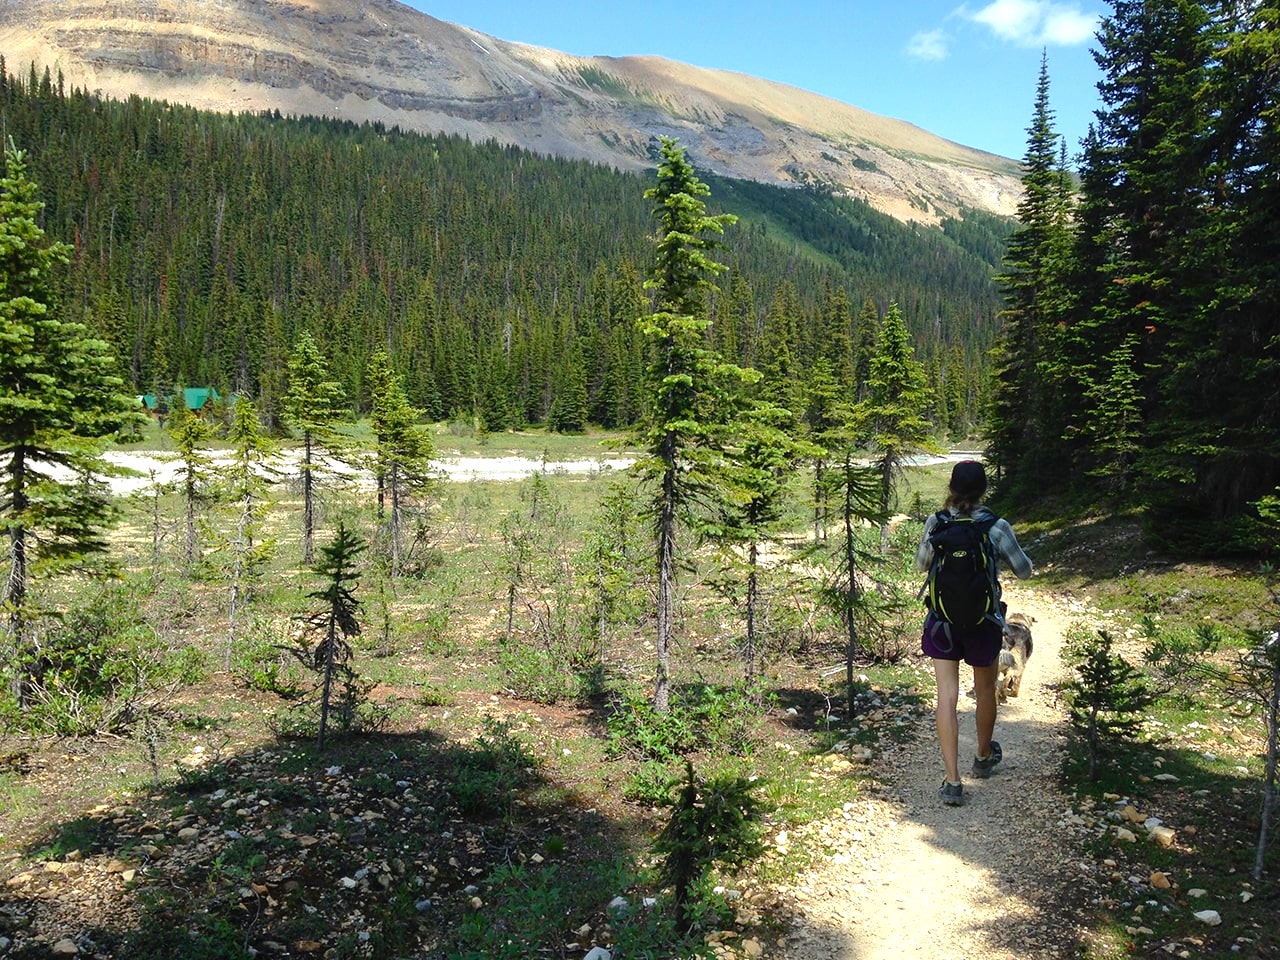 Hiking the Iceline Trail in Yoho National Park, Canada